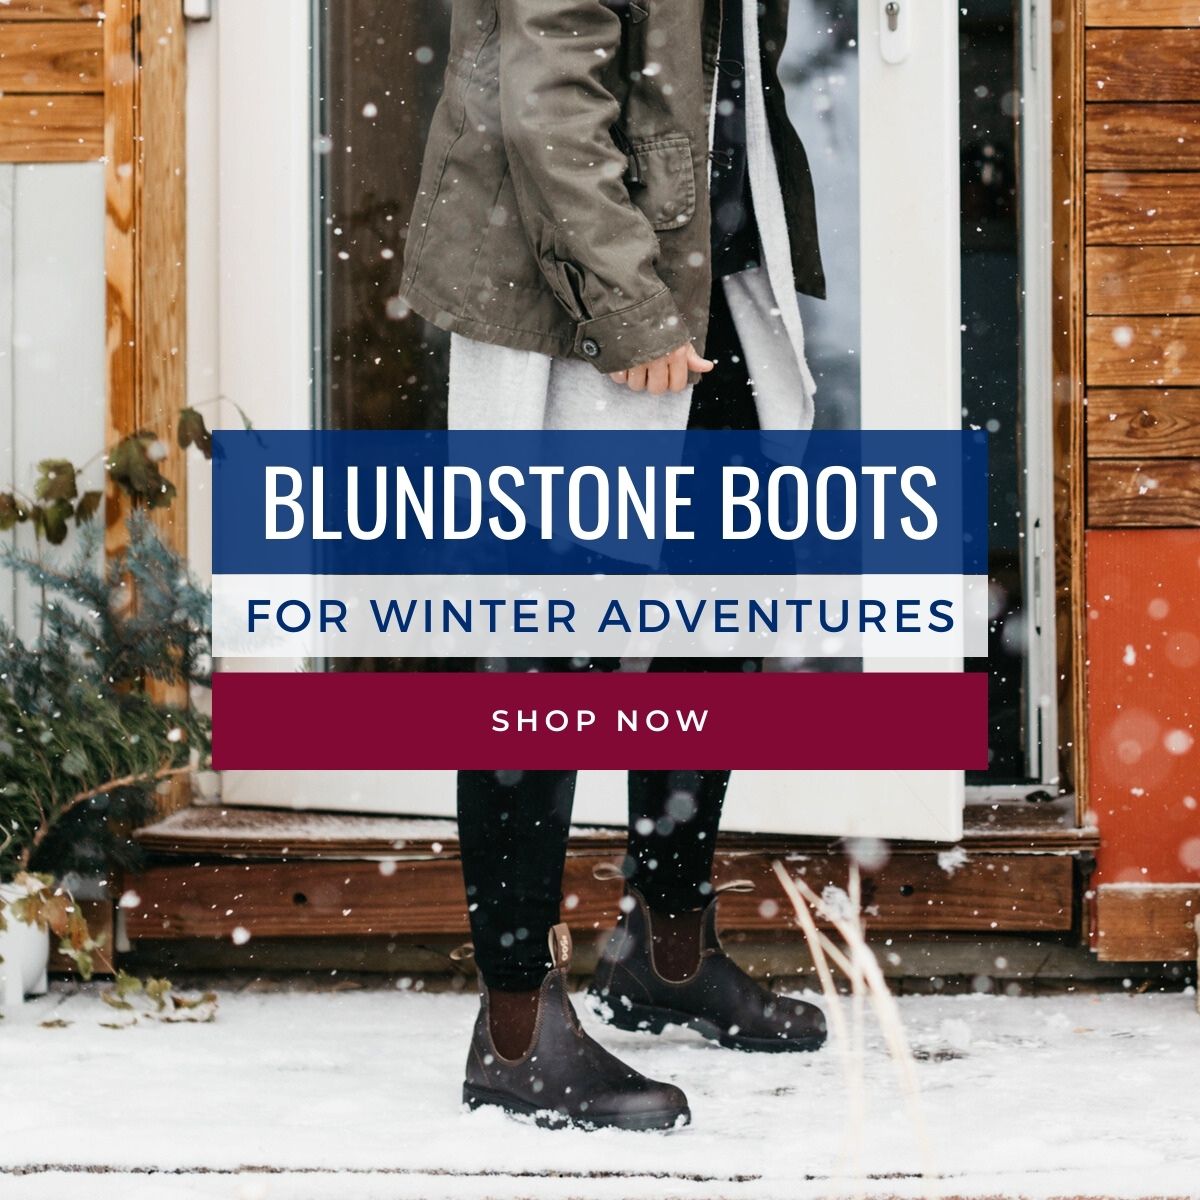 blundstone boots for winter adventrues, shop now